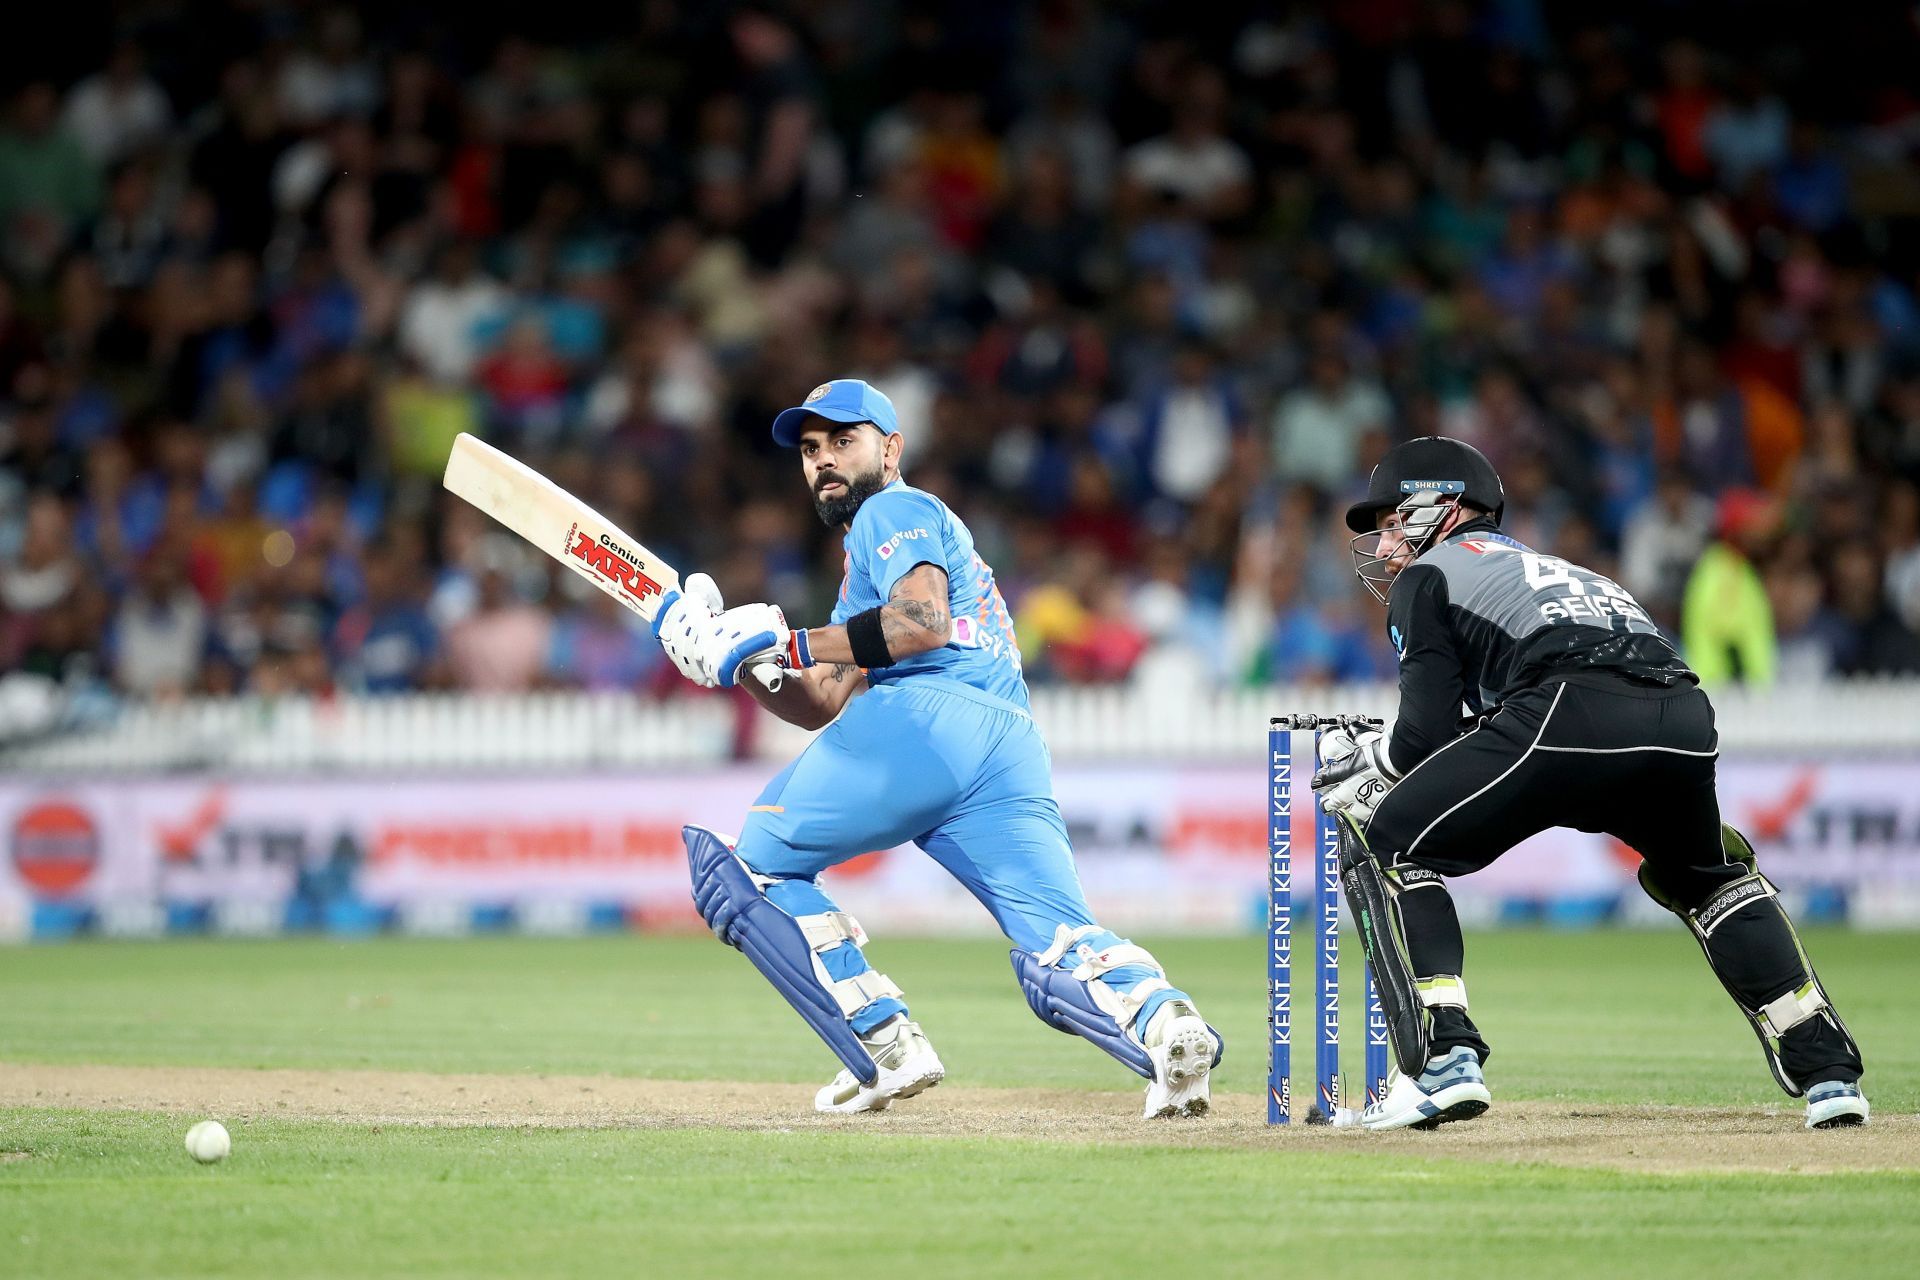 Team India batter Virat Kohli in action during a T20I against New Zealand. Pic: Getty Images